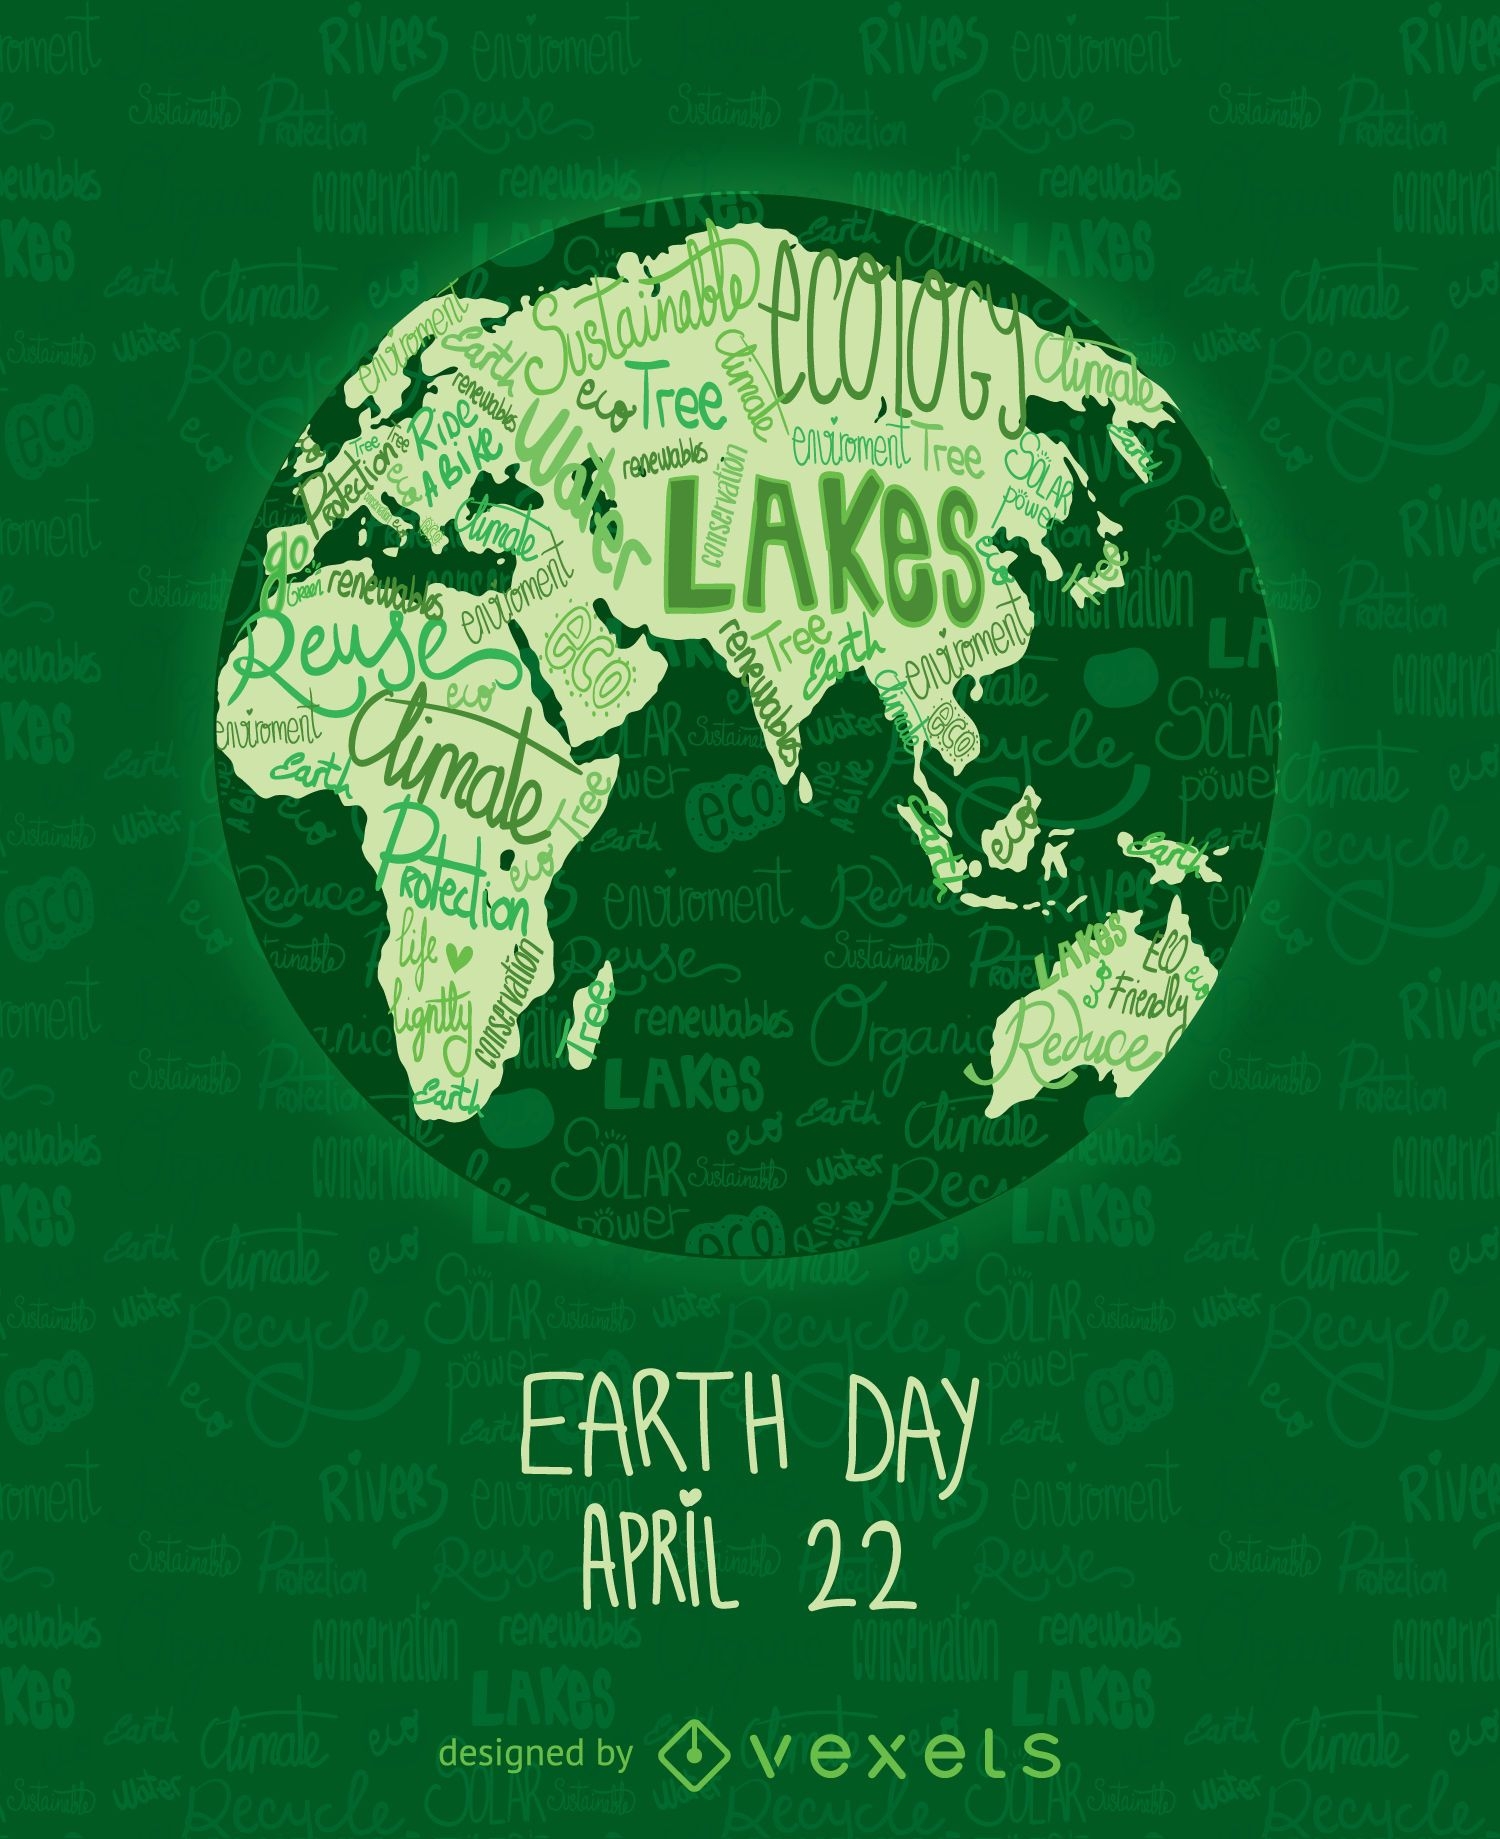 Earth Day Poster With Written World Map - Vector Download
 Earth Day Posters